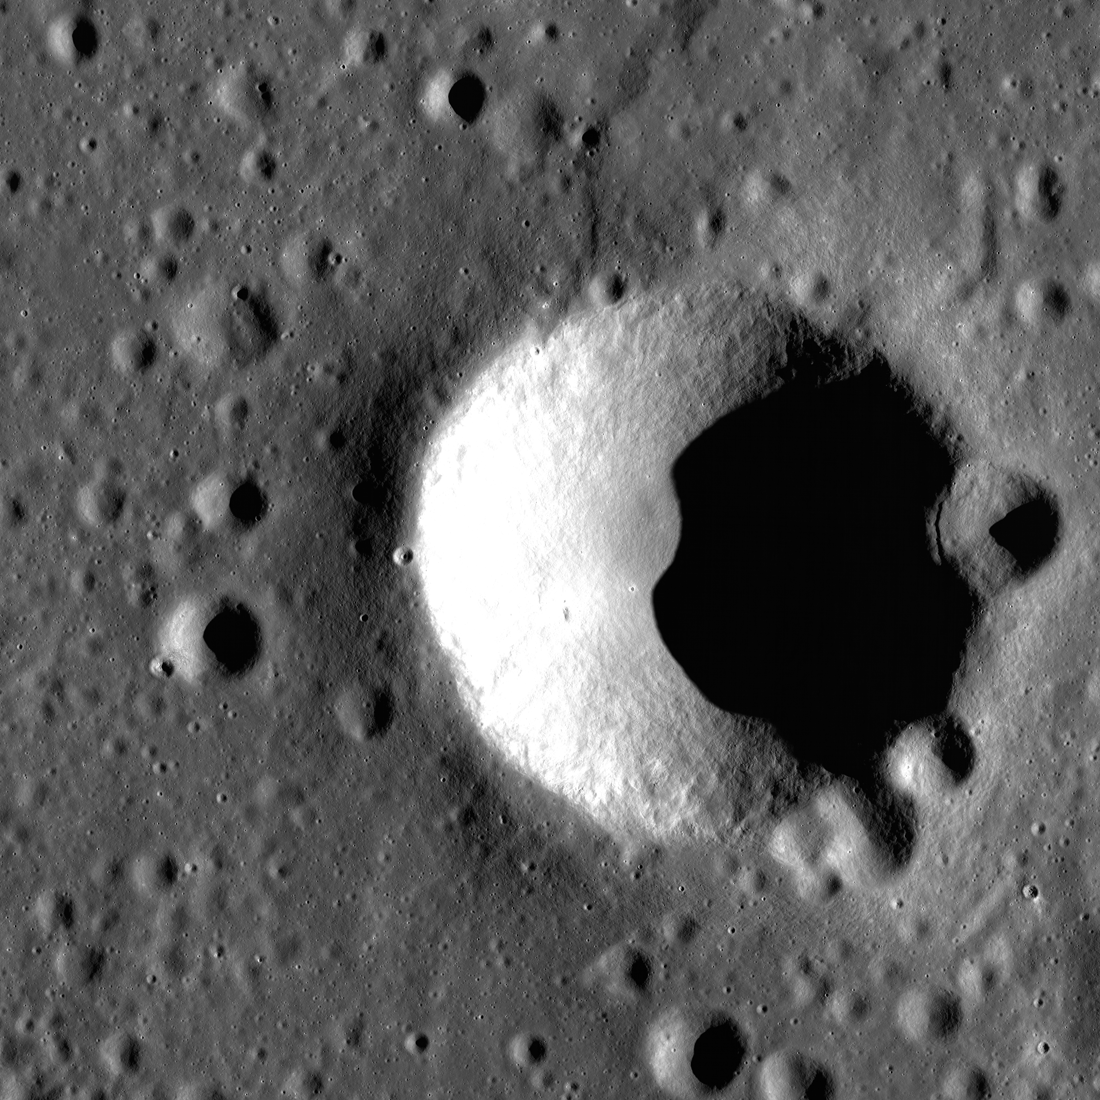 Blagg crater sits astride a wrinkle ridge.